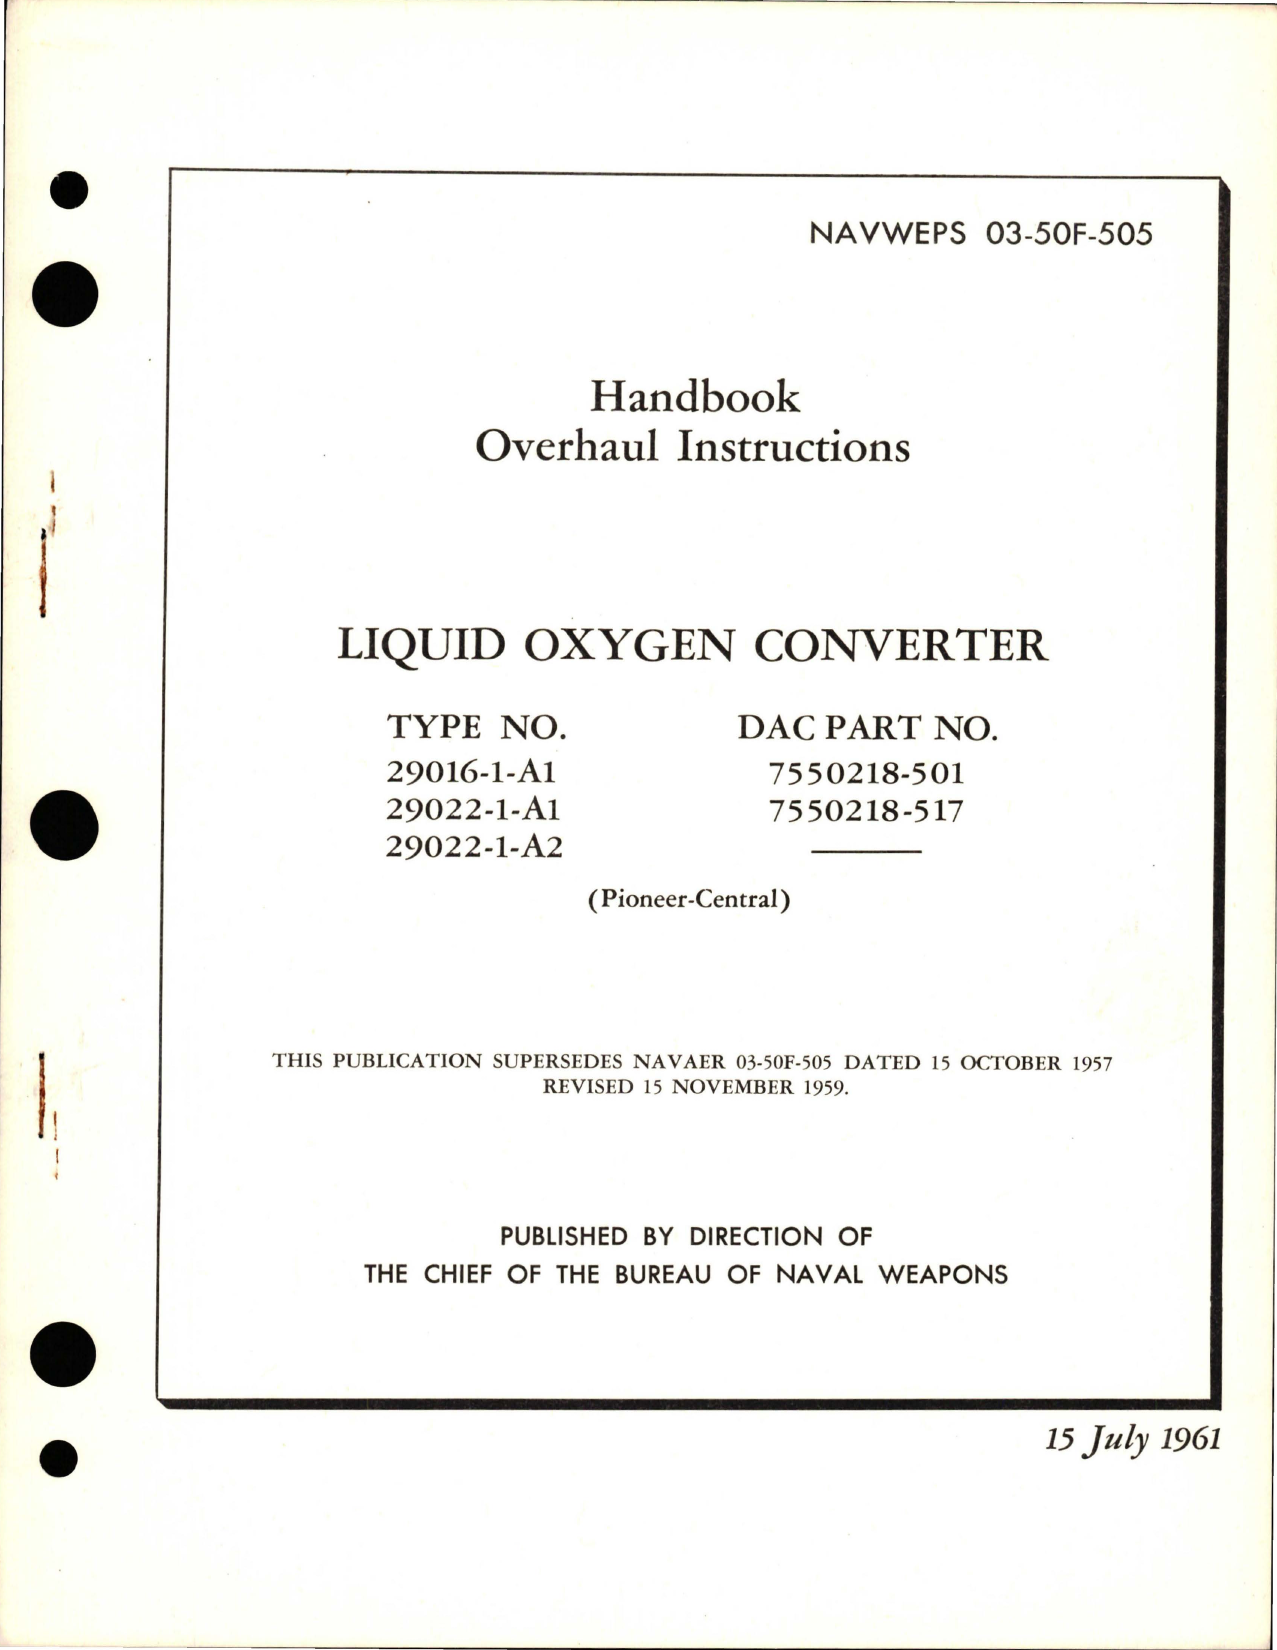 Sample page 1 from AirCorps Library document: Overhaul Instructions for Liquid Oxygen Converter - Types 29016-1-A1, 29022-1-A1, and 9022-1-A2 